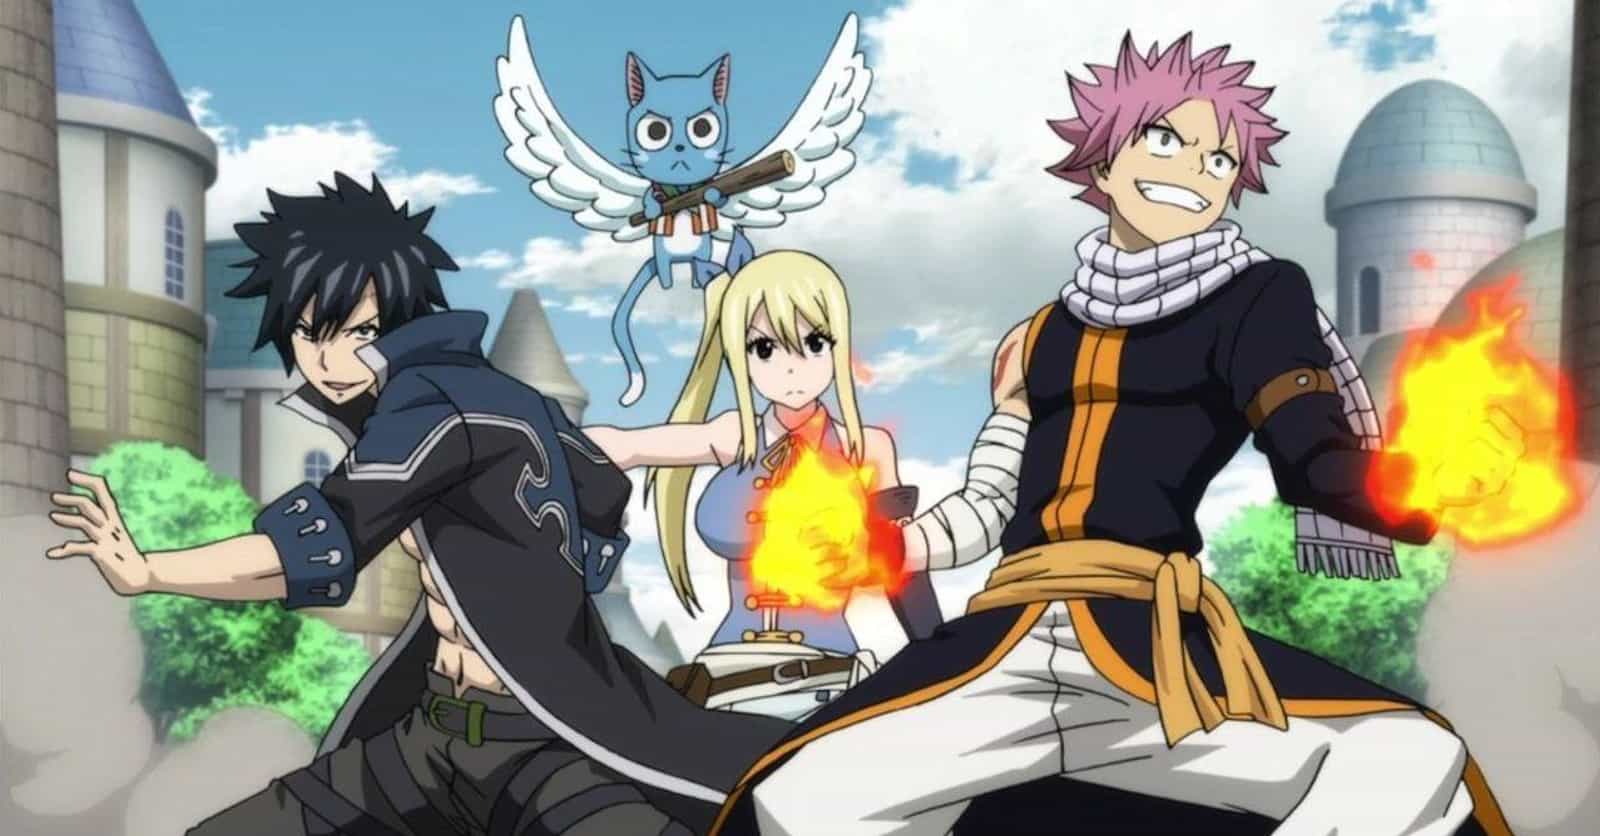 20 Interesting Things You Might Not Know About Fairy Tail